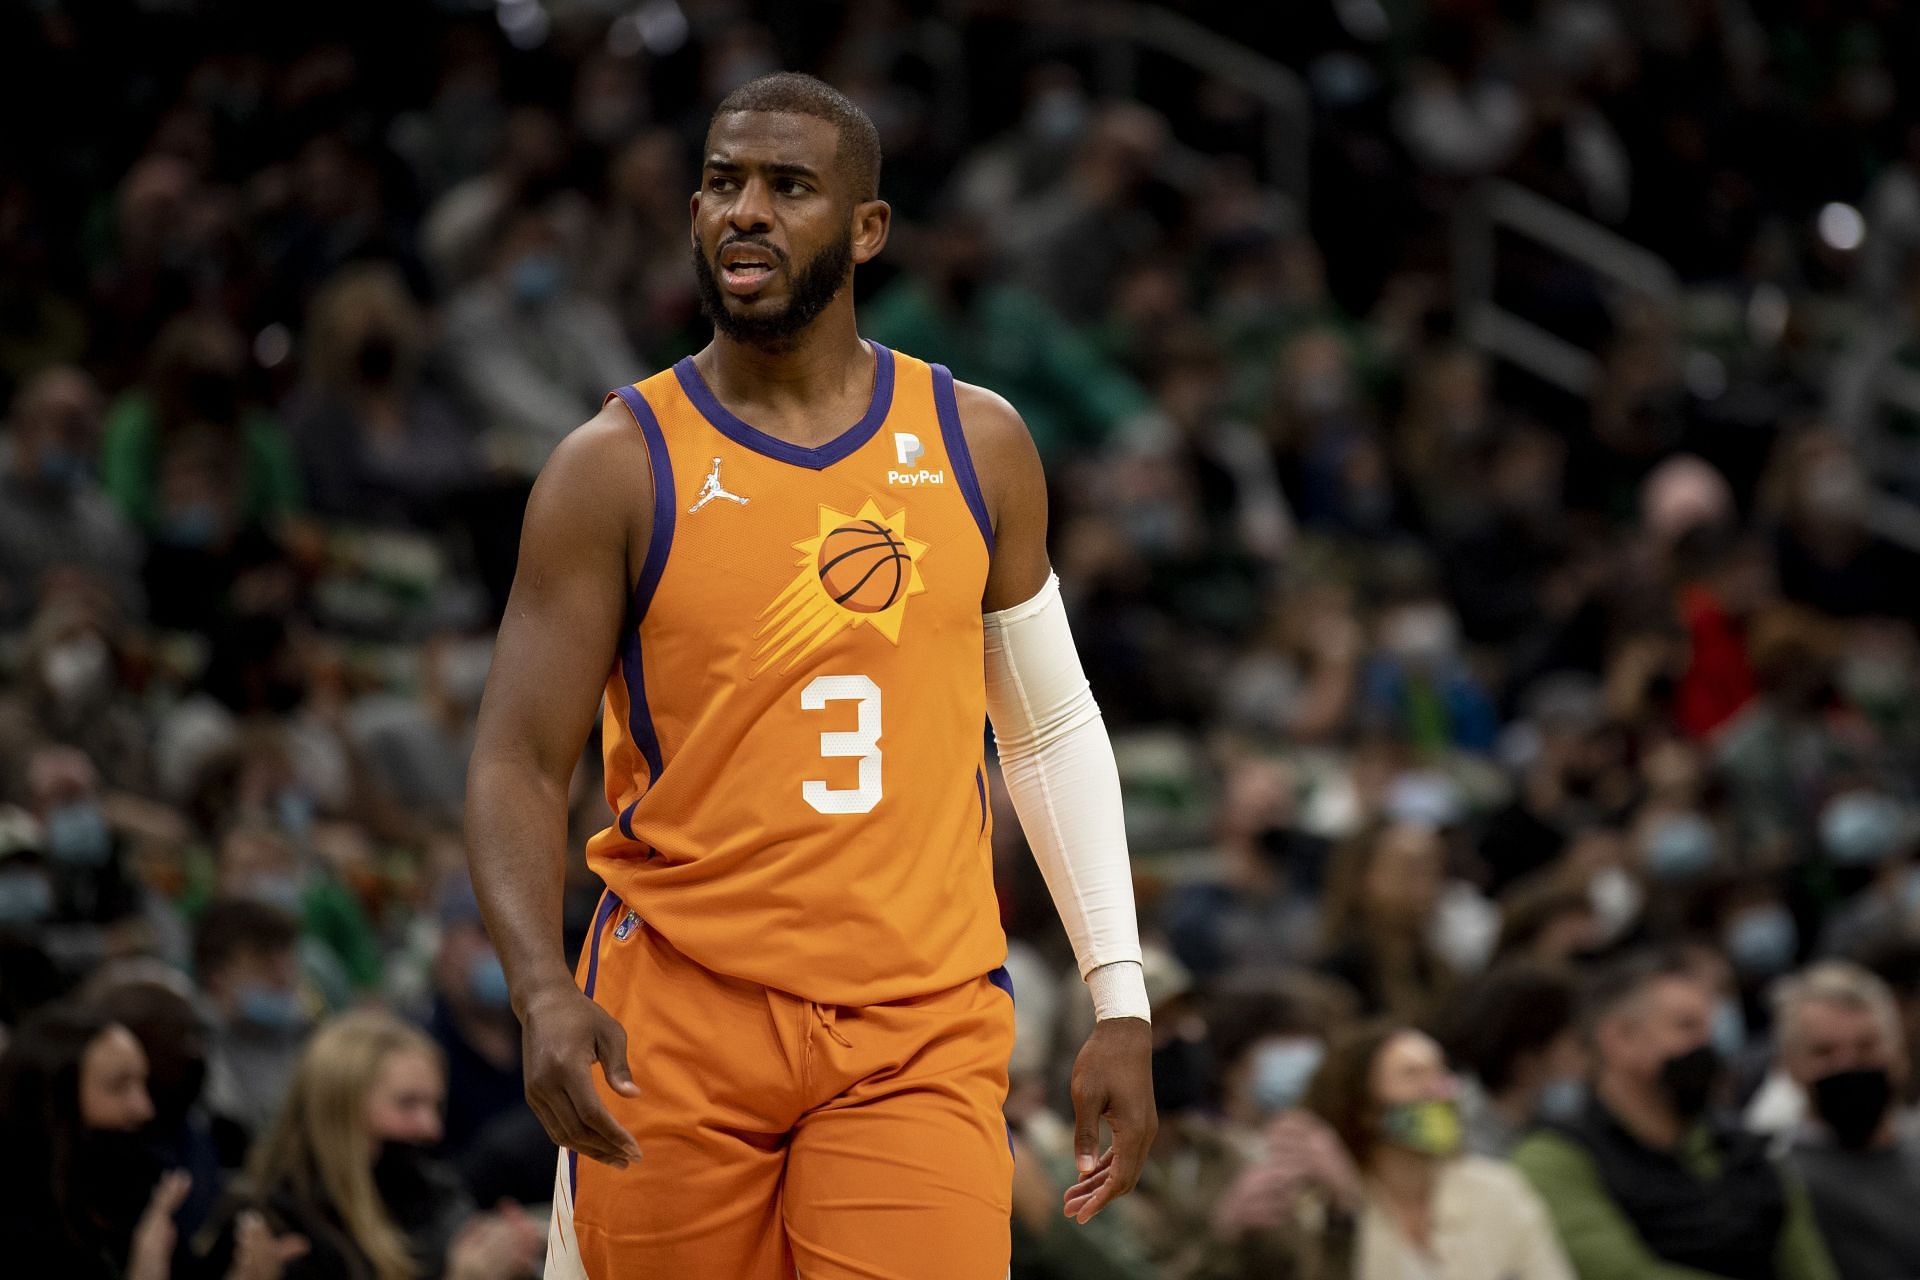 Chris Paul #3 of the Phoenix Suns looks on during the first half of a game against the Boston Celtics at TD Garden on December 31, 2021 in Boston, Massachusetts.